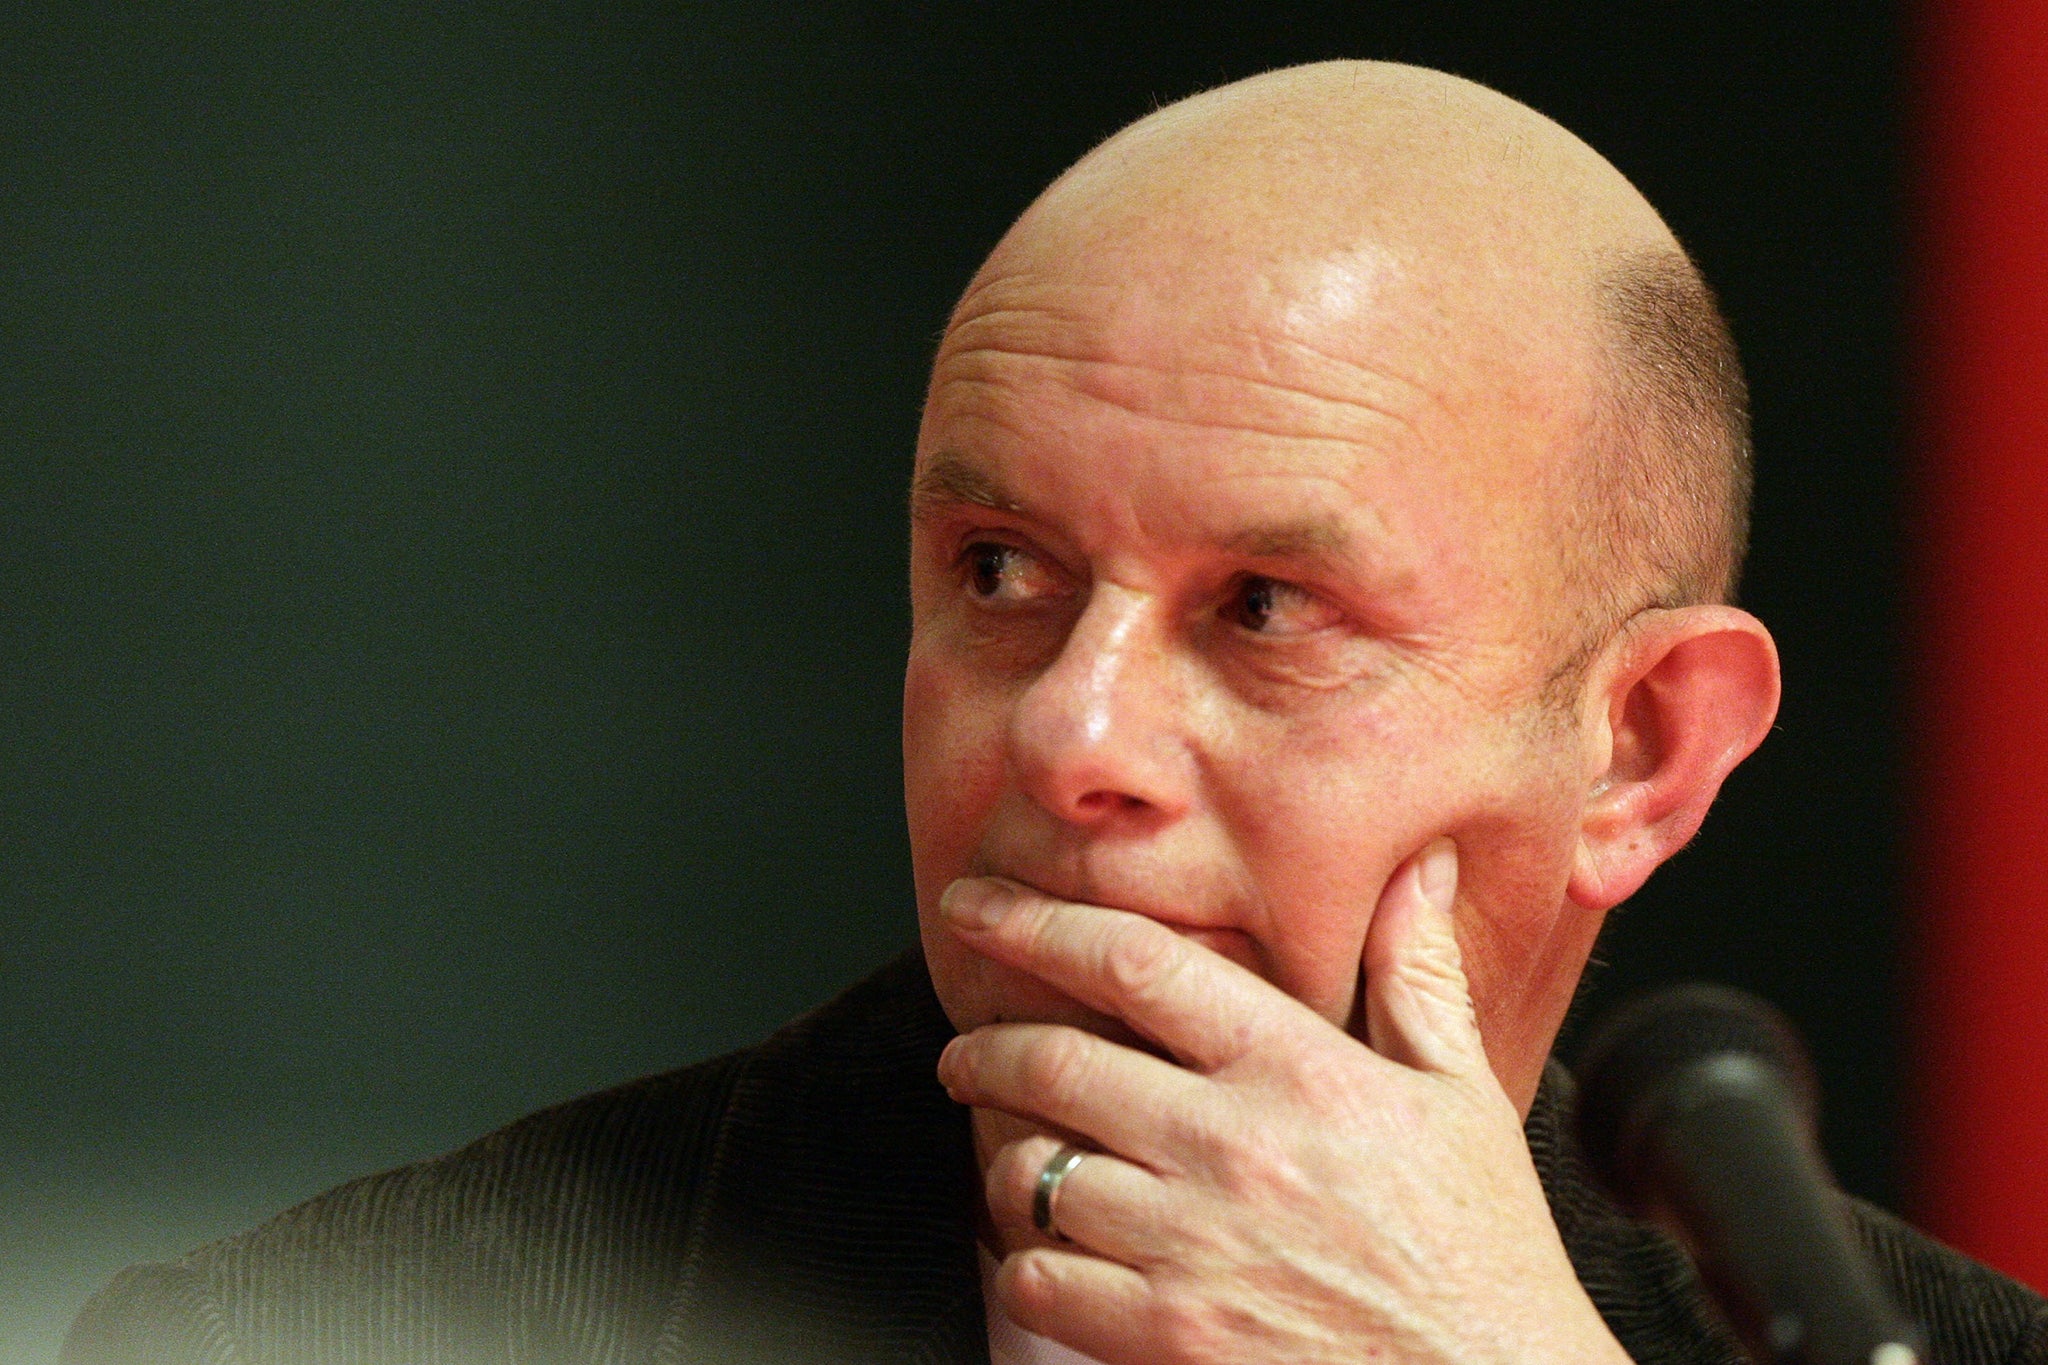 Bestselling author Nick Hornby says boys need discouragement to get them reading